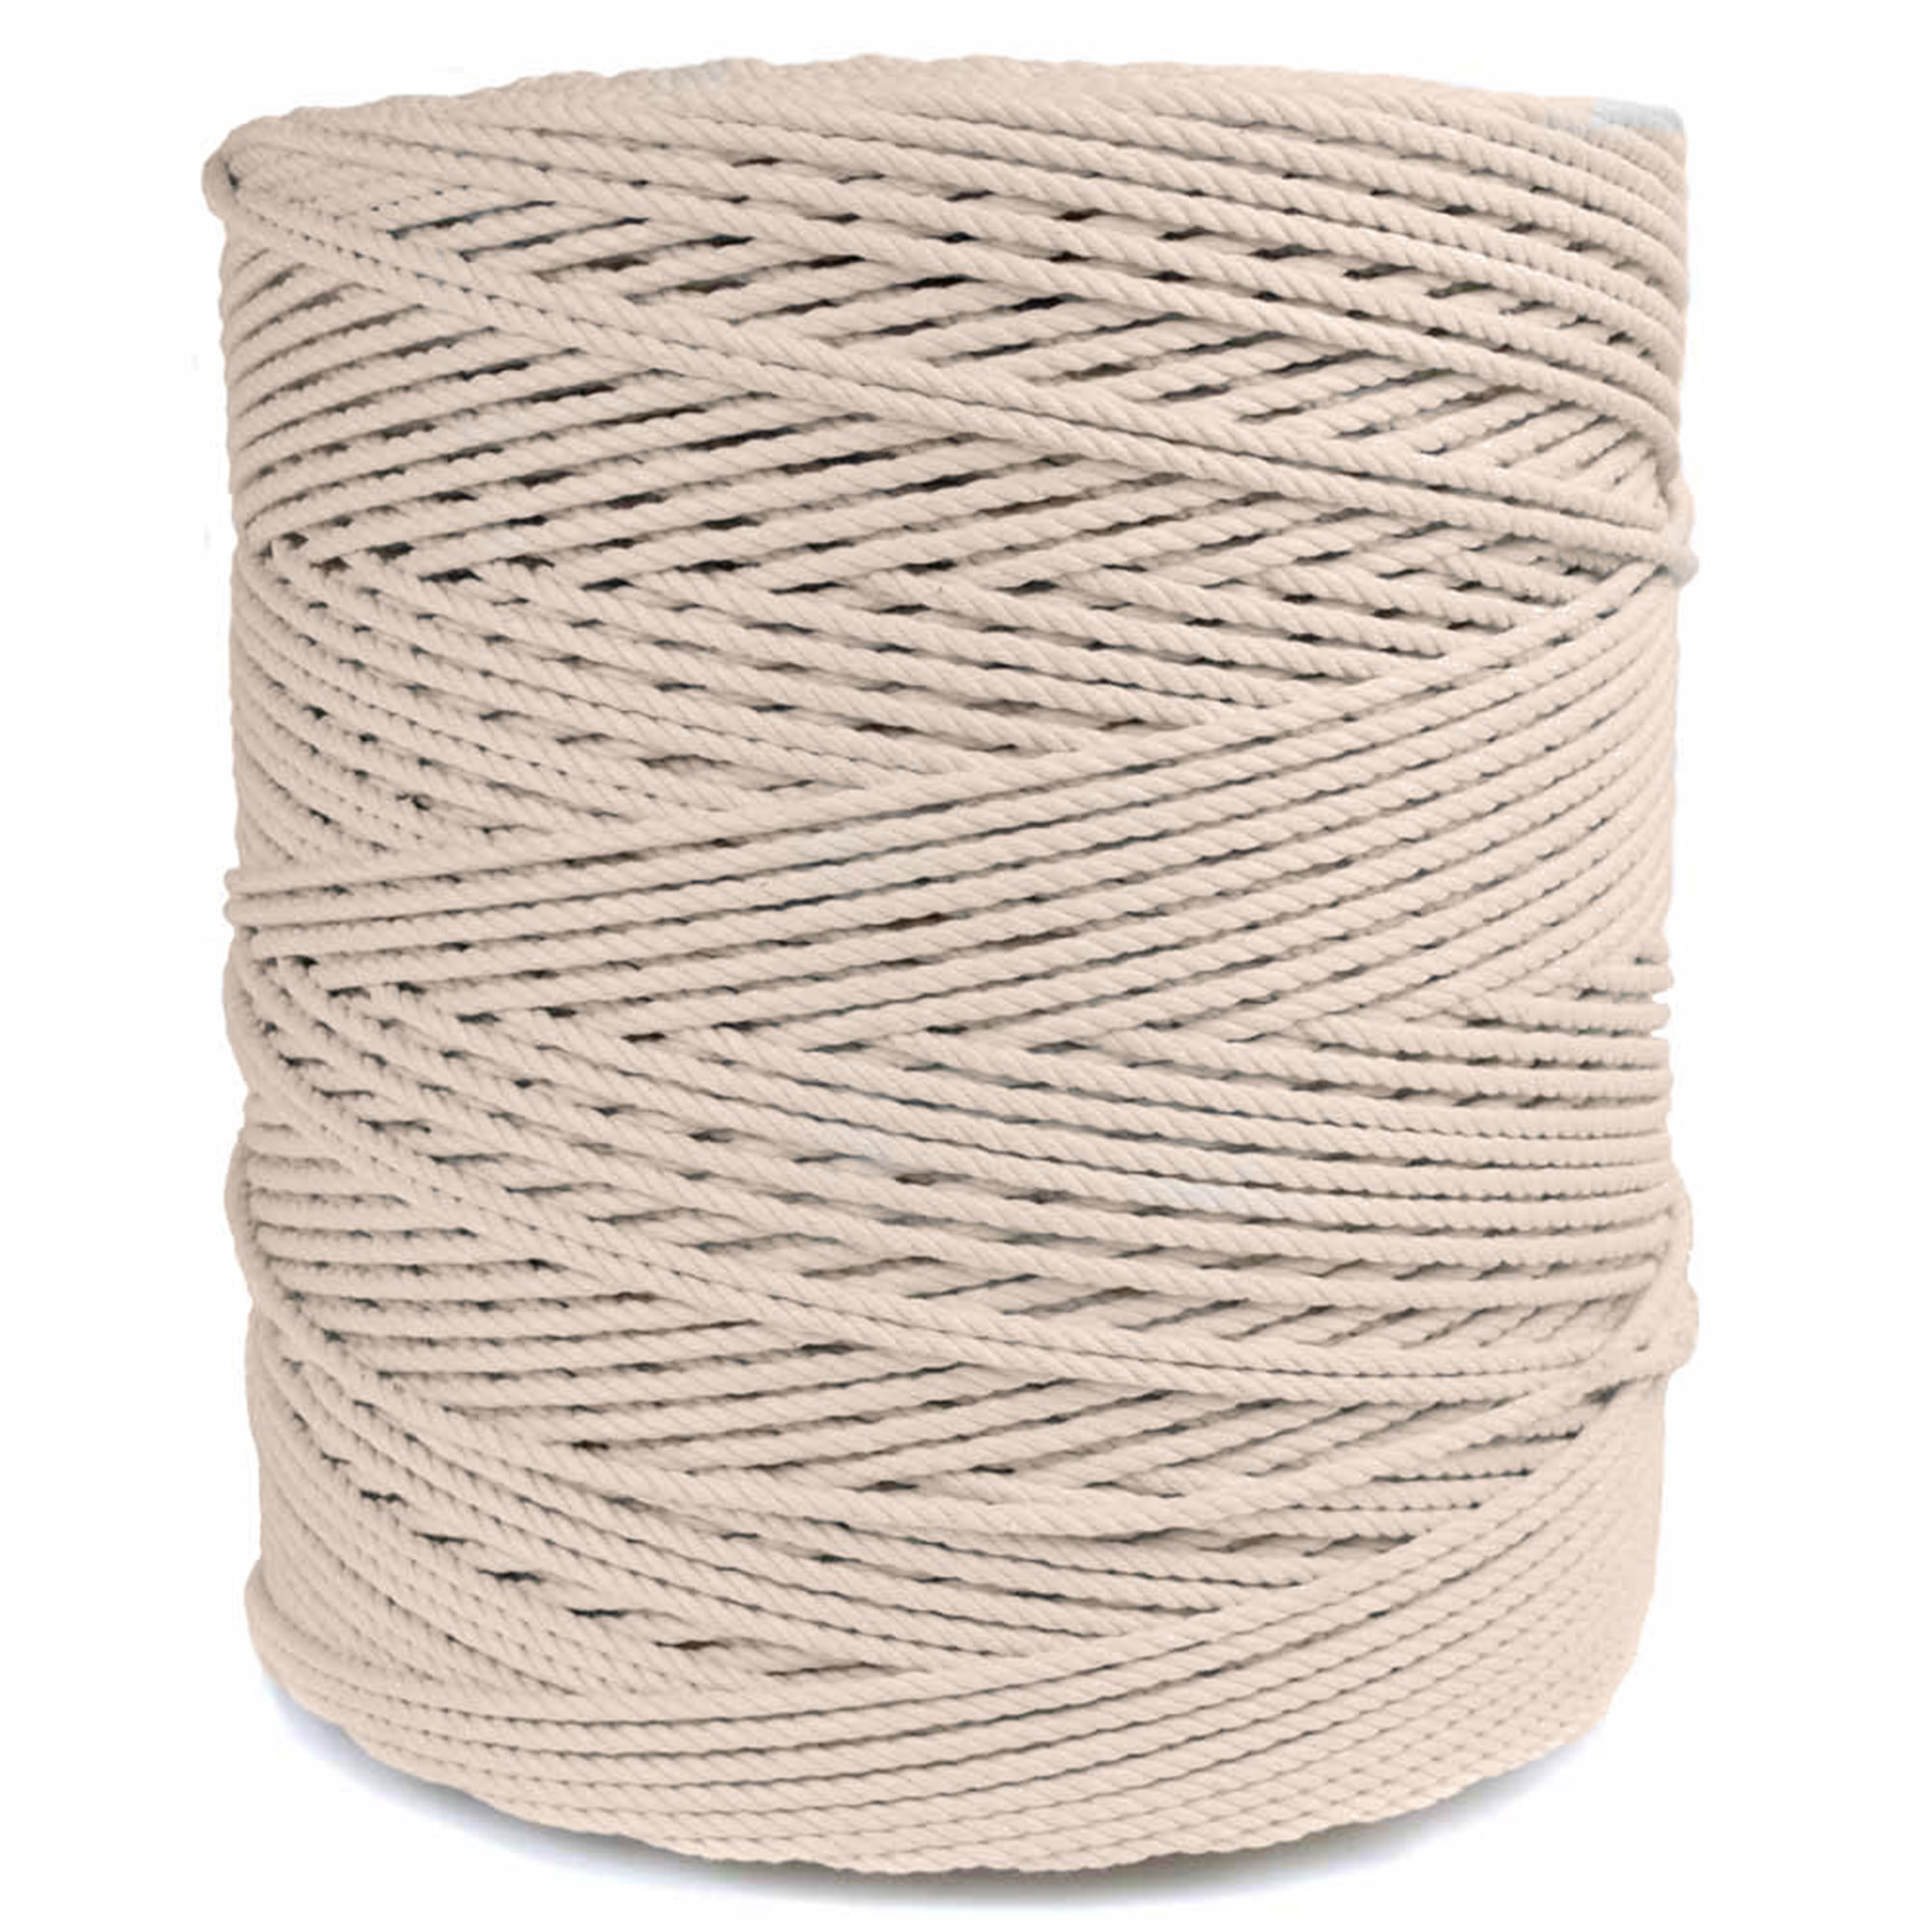 Golberg 100% Natural Cotton Rope - 5/32, 3/16, 7/32, 1/4, 5/16, 3/8, 1/2, 5/8, 3/4, 1, 1-1/4, and 1-1/2 Inch Diameters - Twisted White Cotton Rope - Several Lengths to Choose From - image 2 of 4